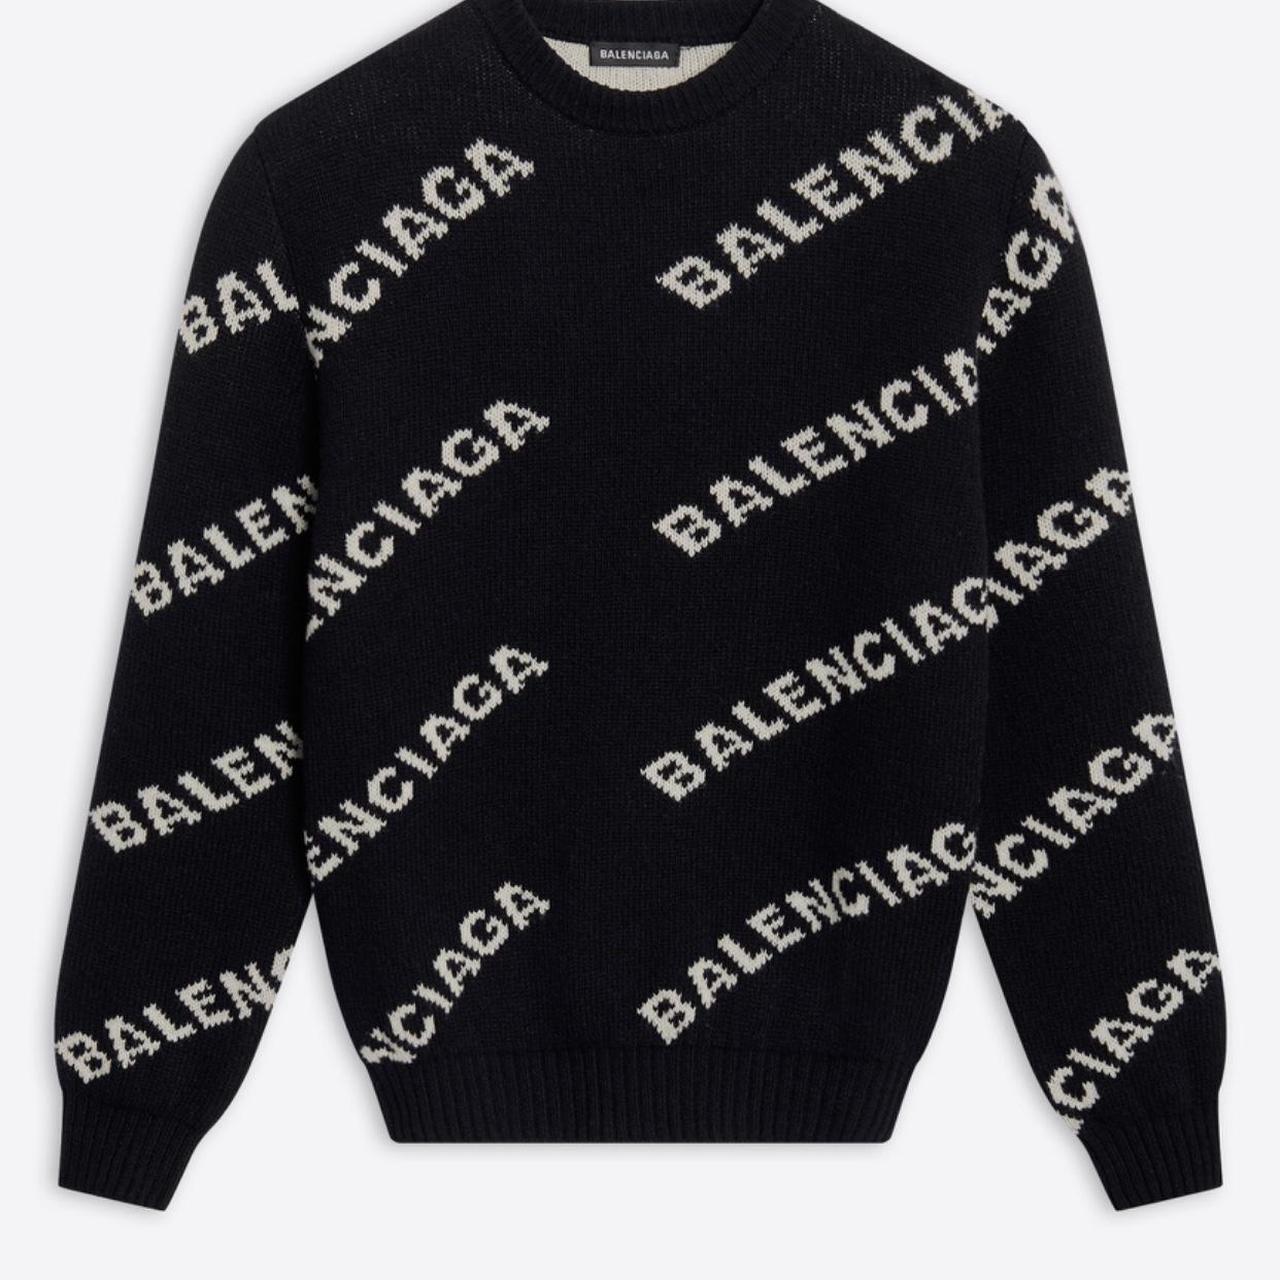 New with tags knitted Balenciaga jumper in black.... - Depop